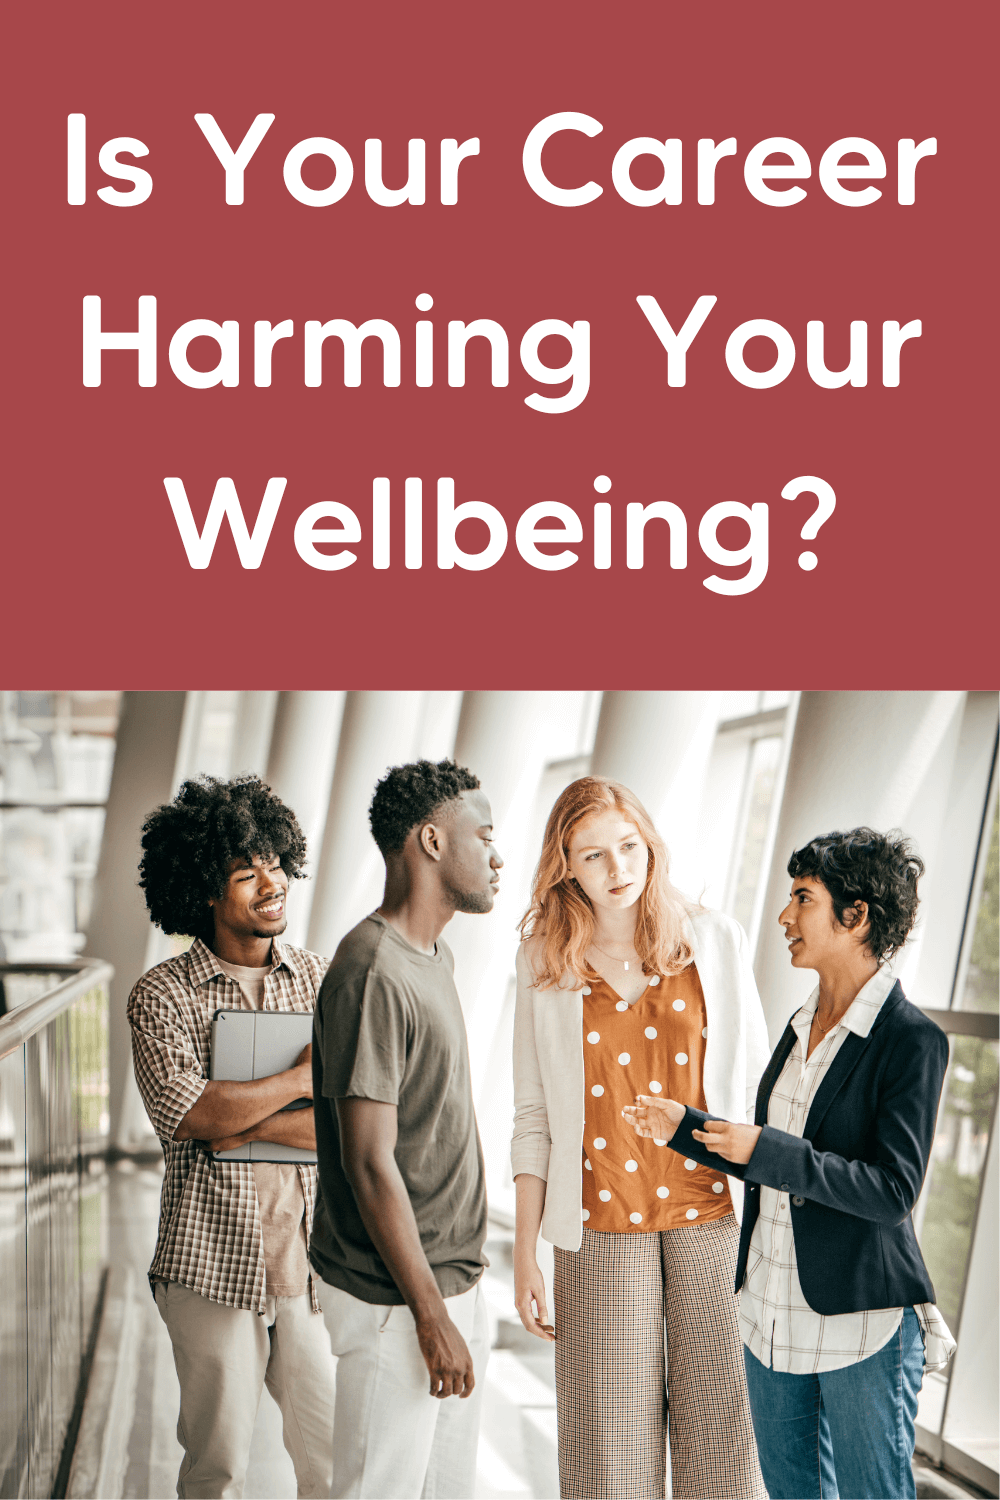 Career Harming Your Wellbeing